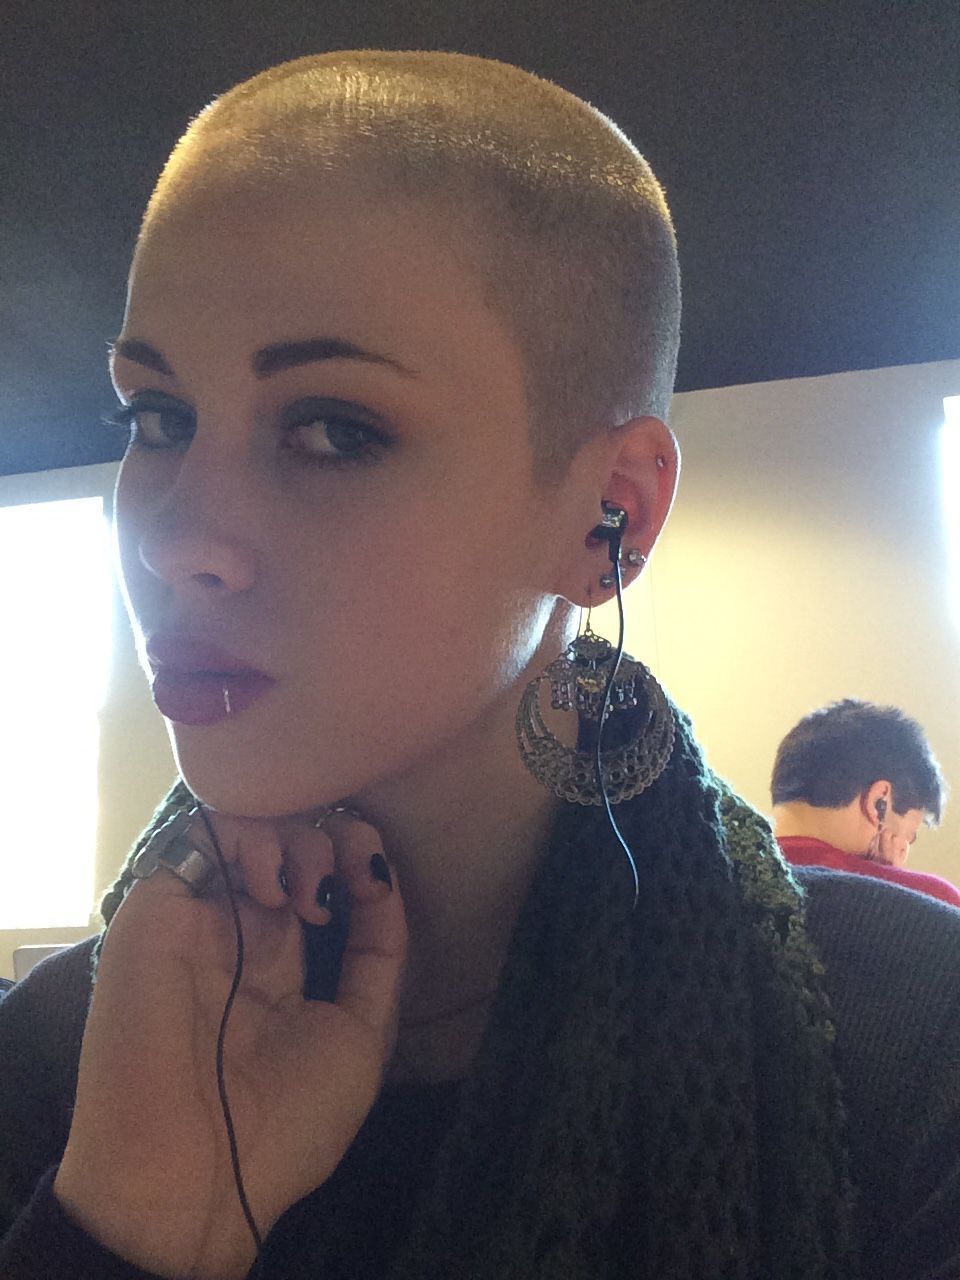 Fourformyheadaches: Big Earrings And No Hair (View 11 of 25)